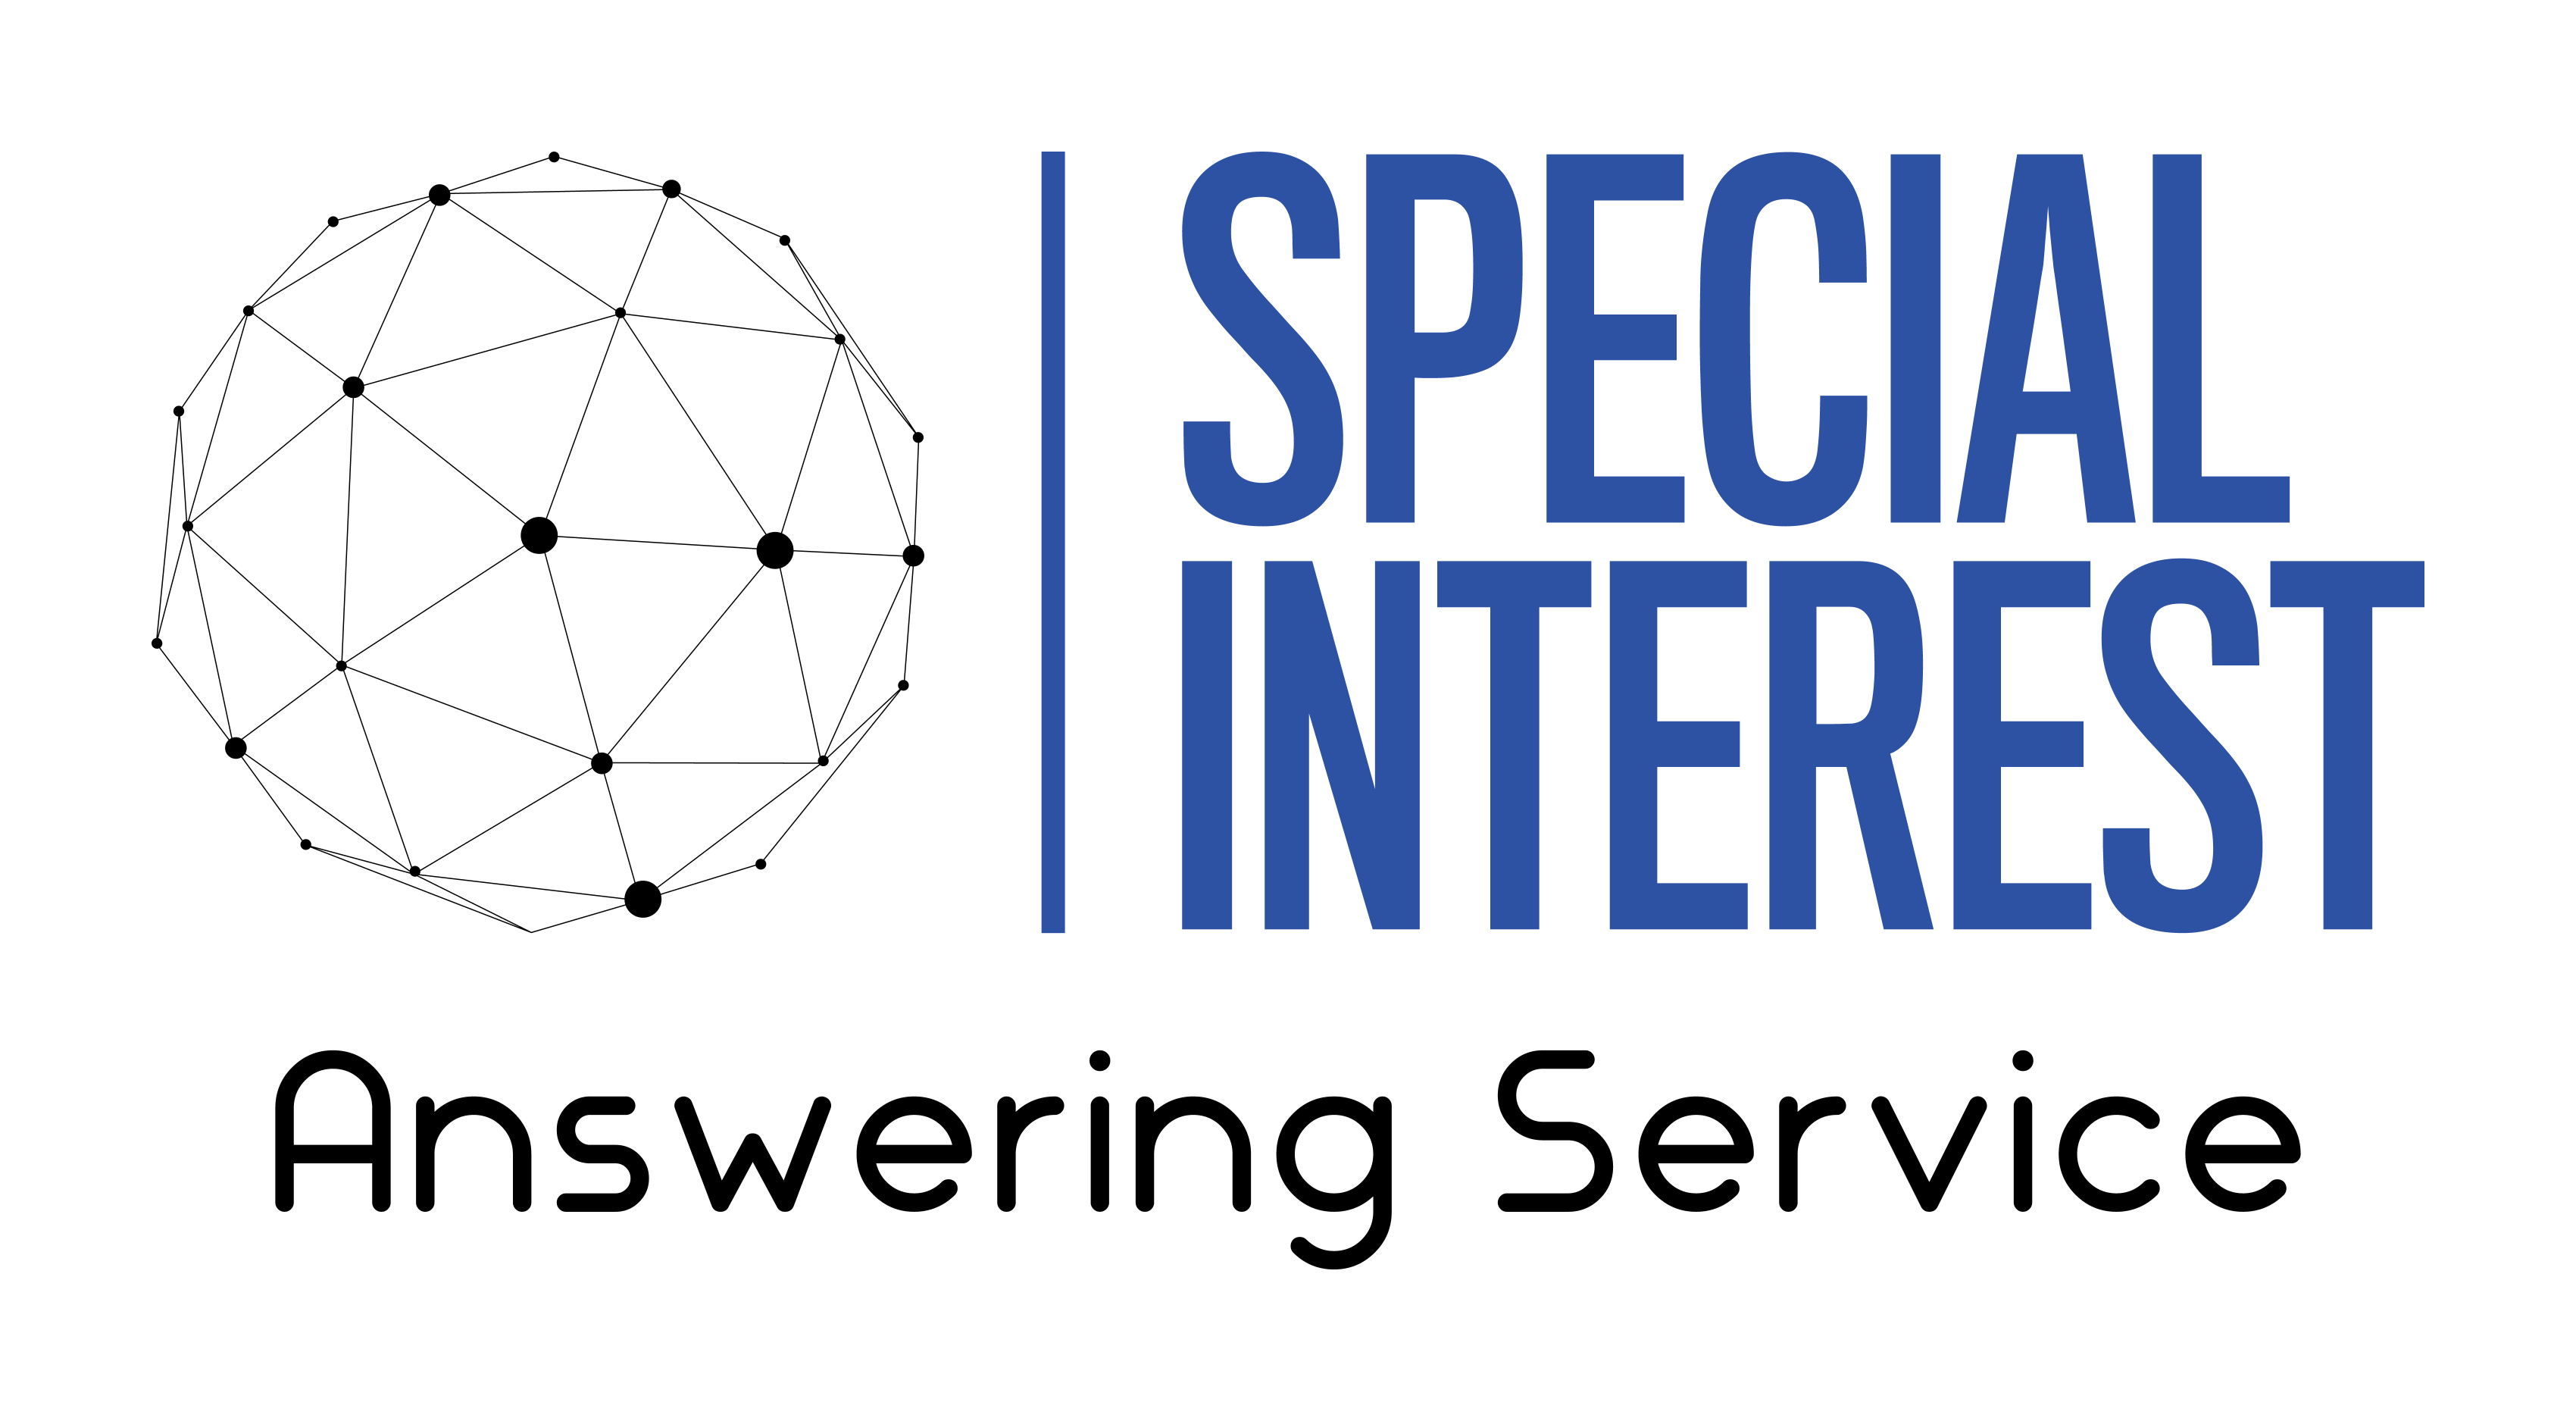 Answering. Special interest Travel. Research interest logo.